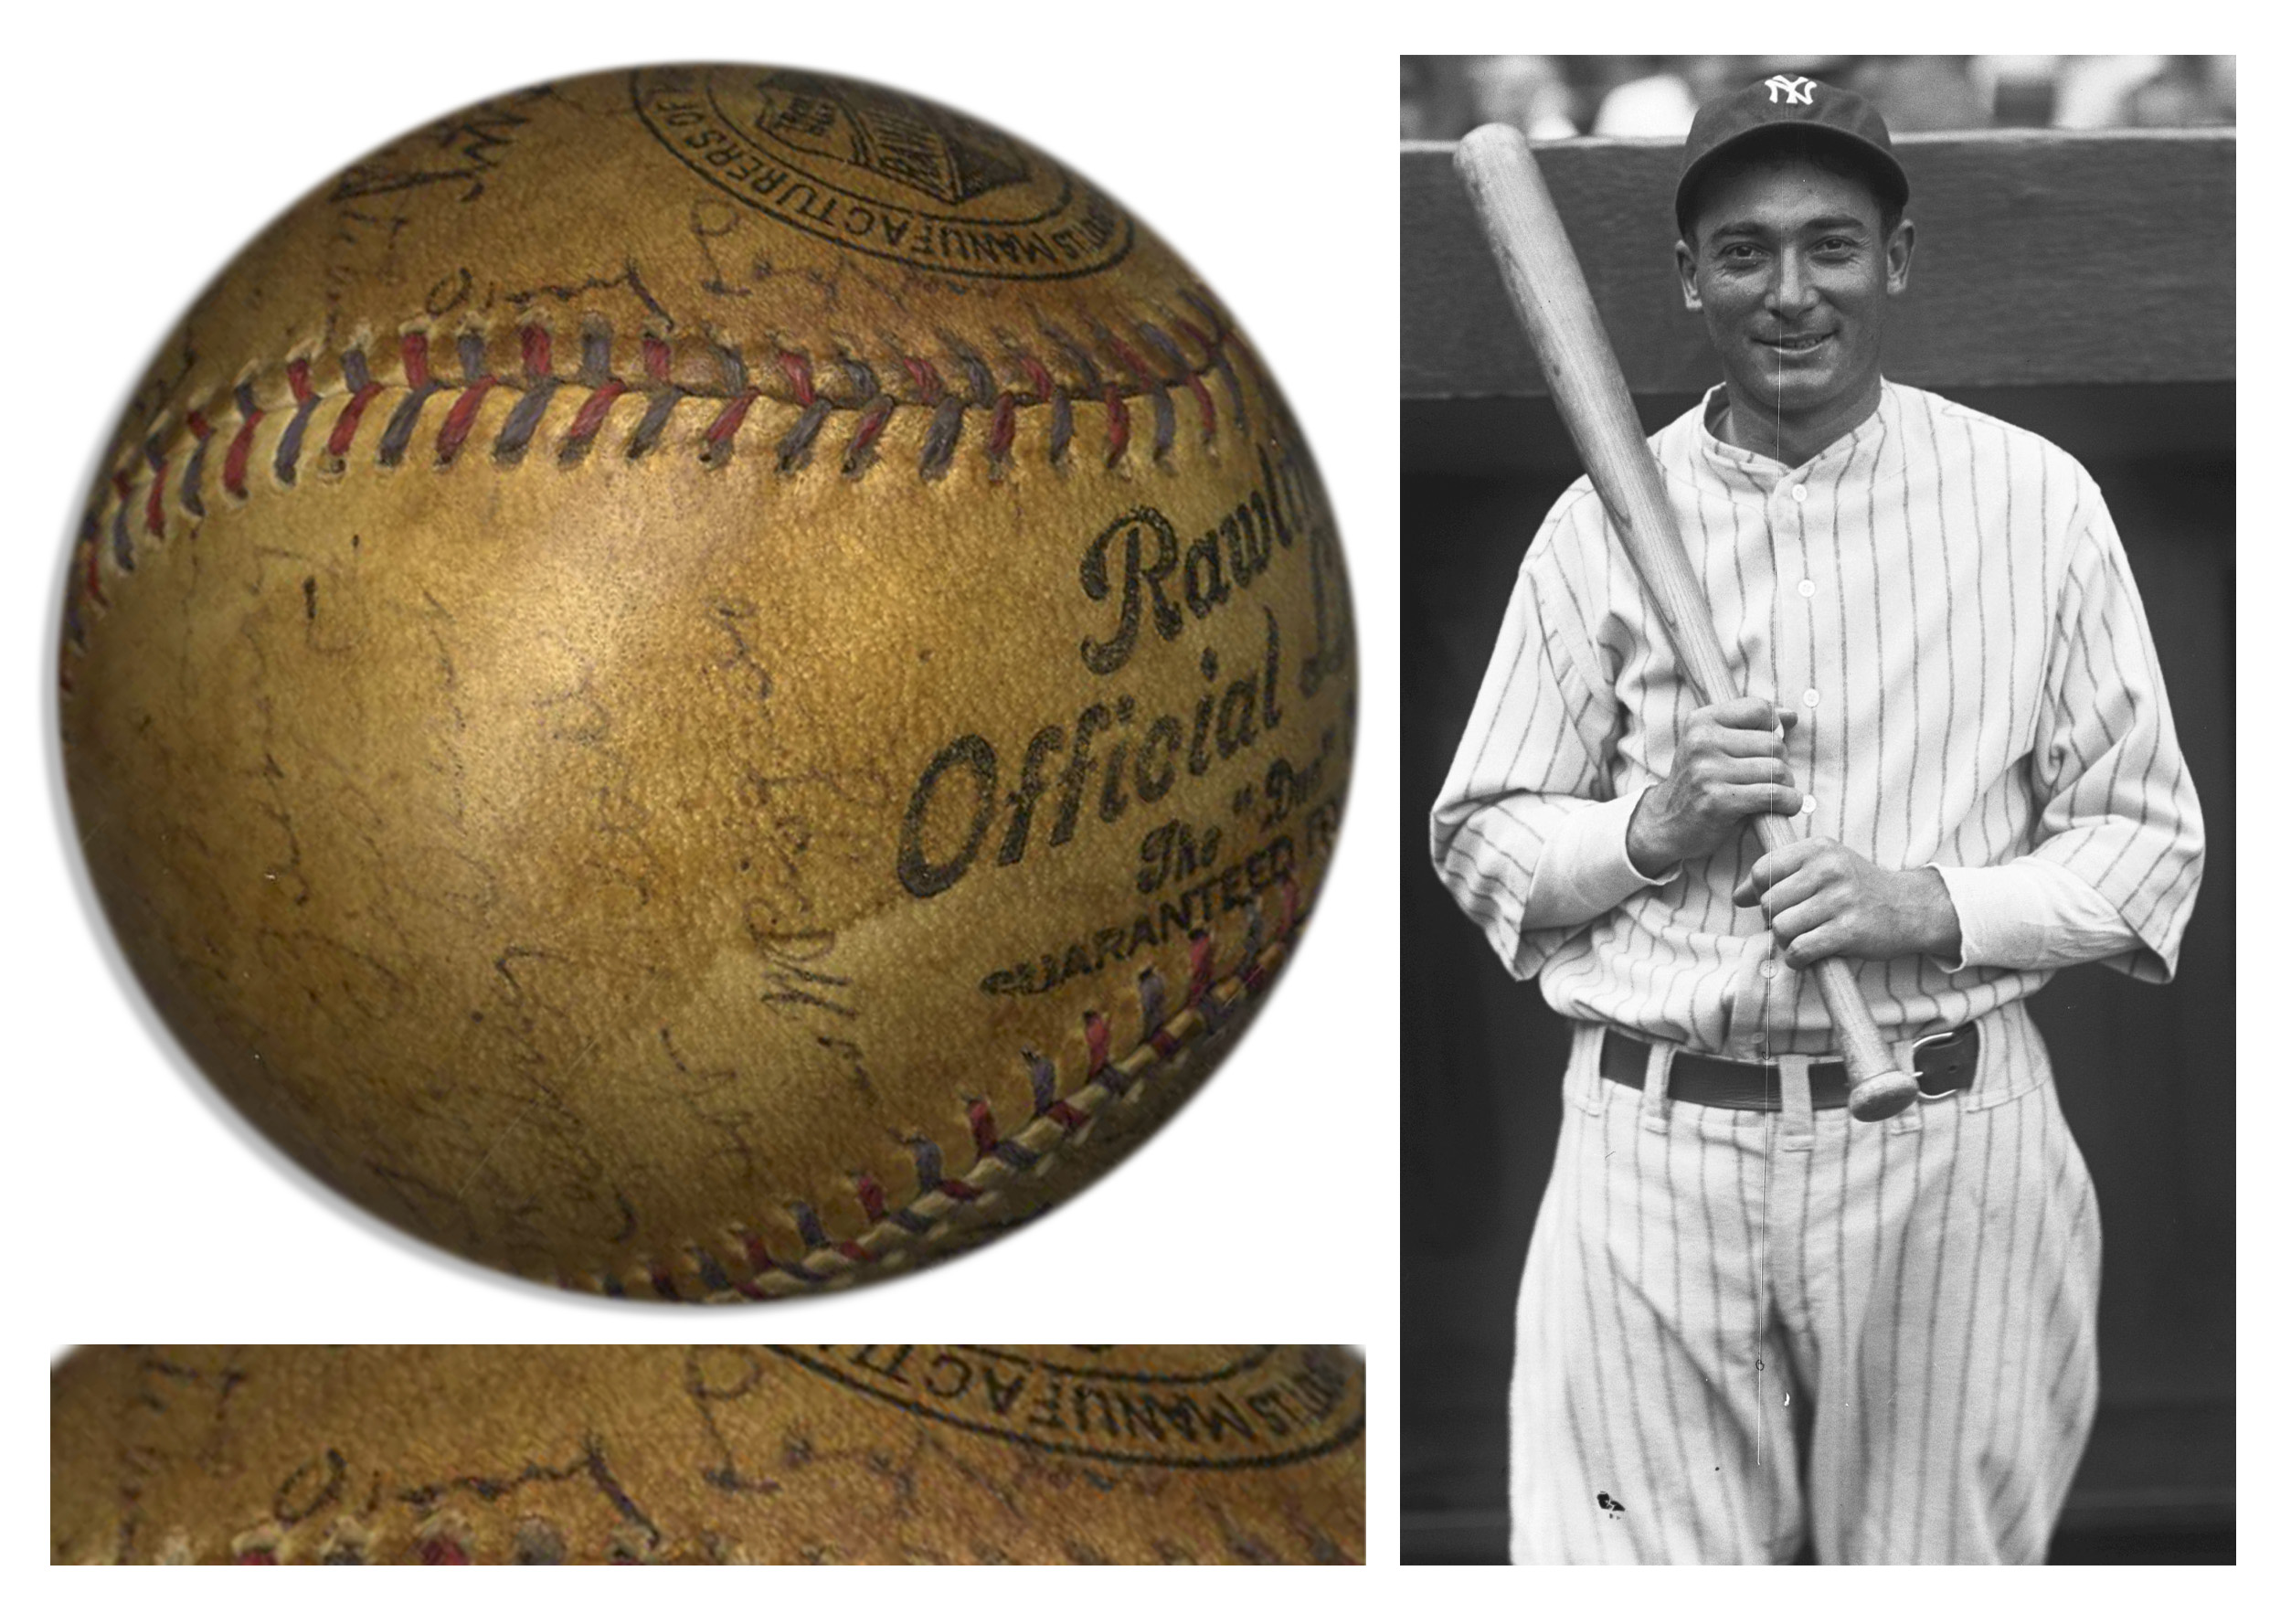 Yankees Team-Signed Ball From 1929, Featuring Babe Ruth's Signature on...